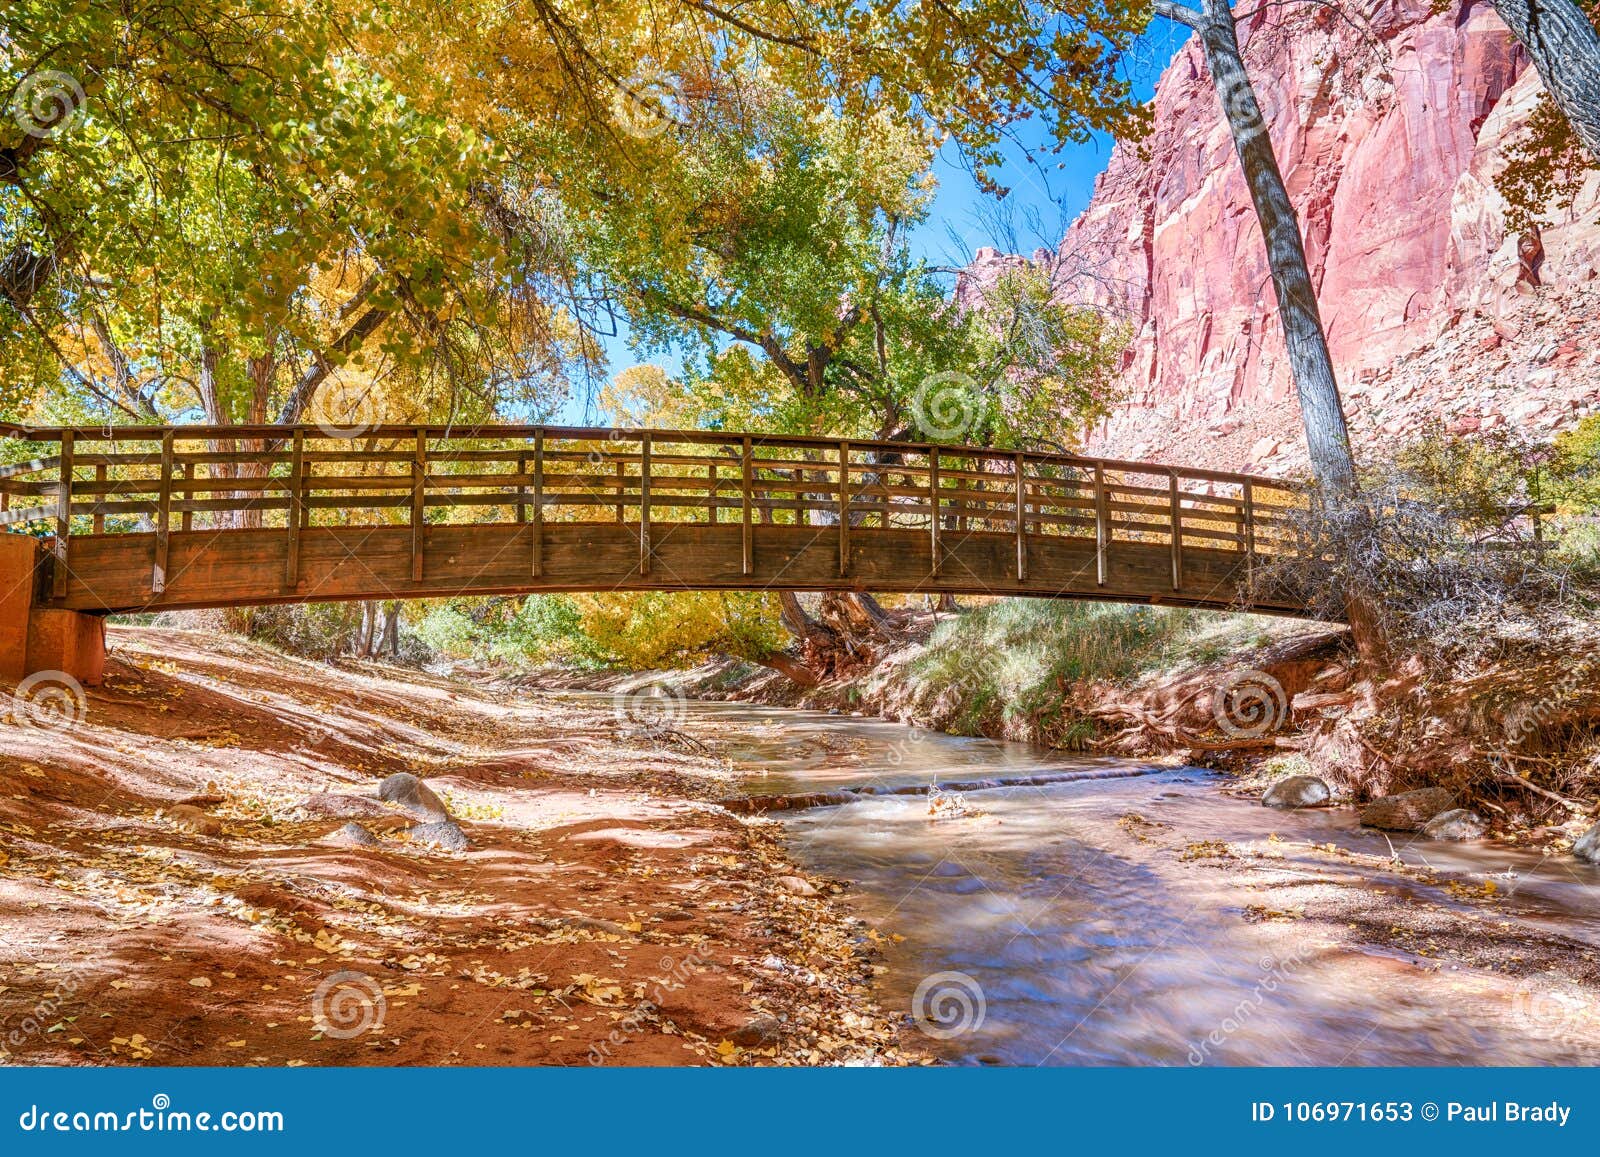 bridge over the fremont river in capitol reef